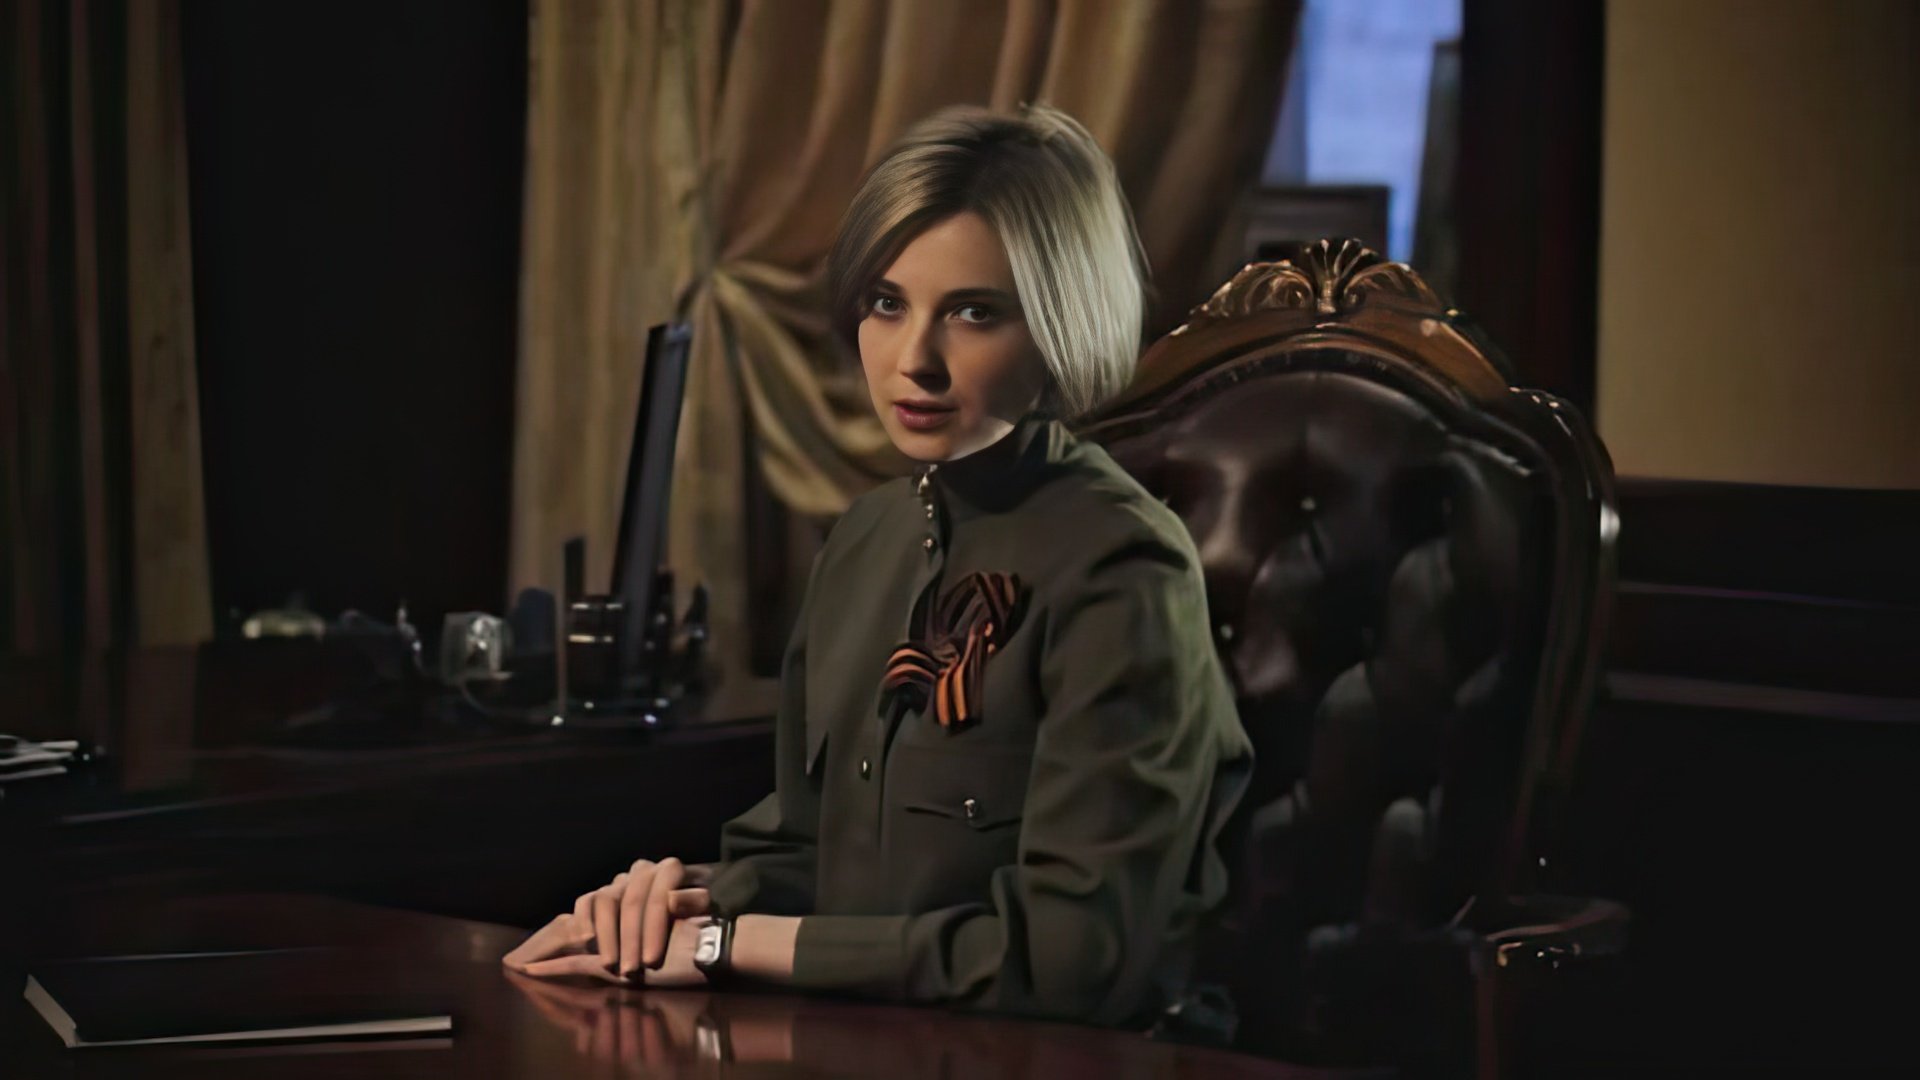 Two grandfathers of Poklonskaya died during the Second World War